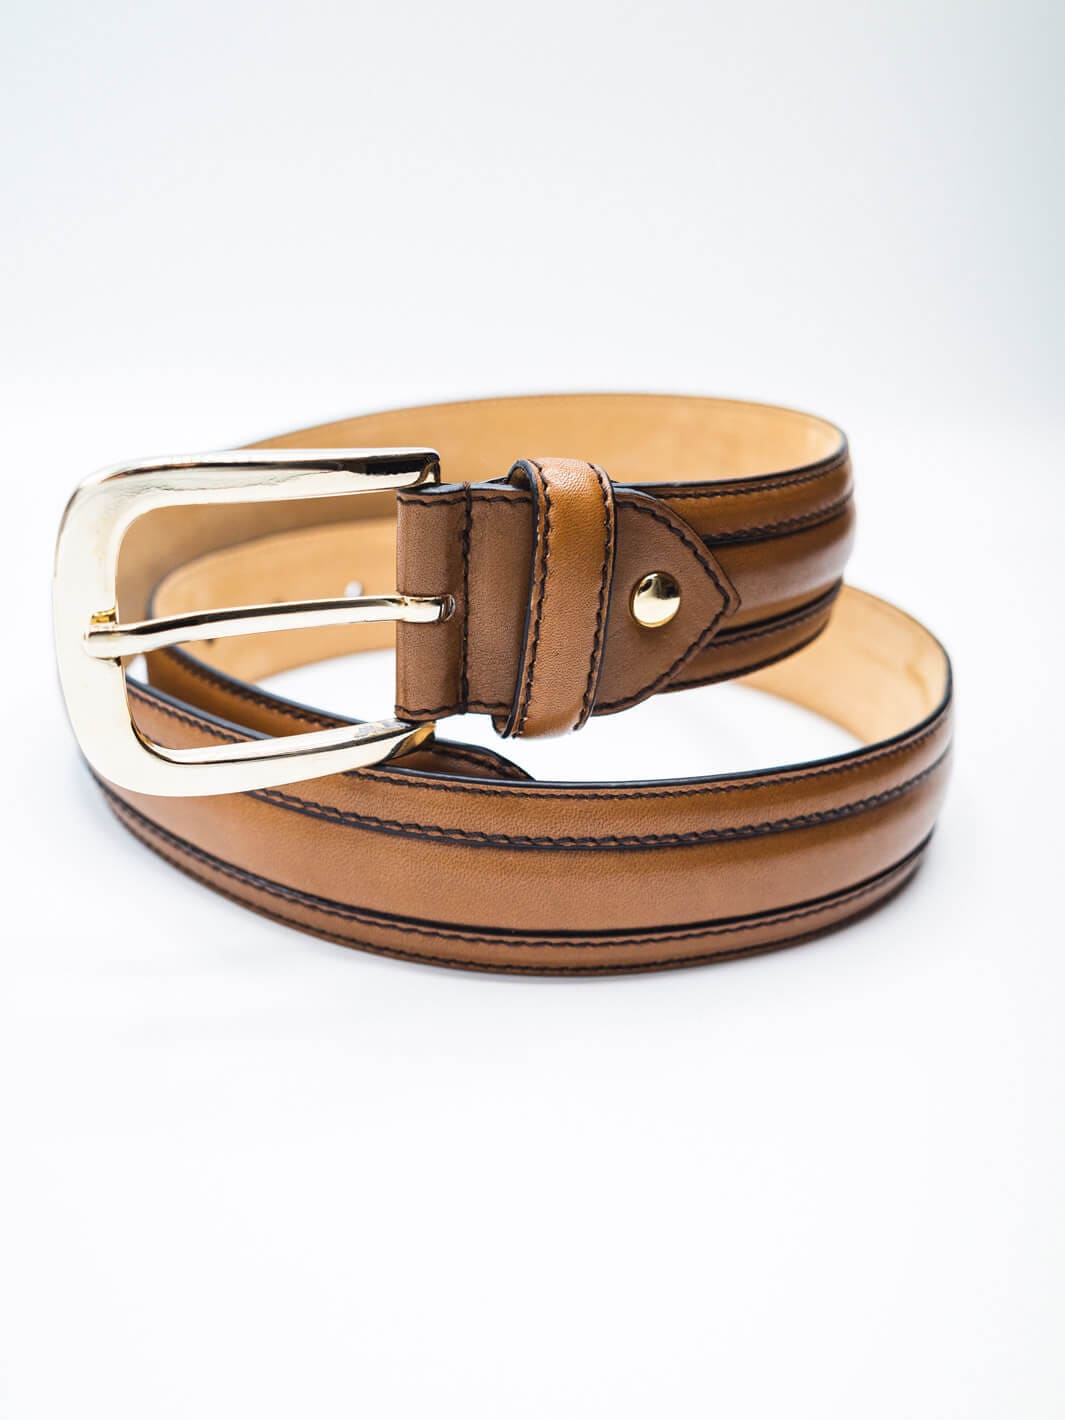 Anatoly's A&S Brown Leather Belt